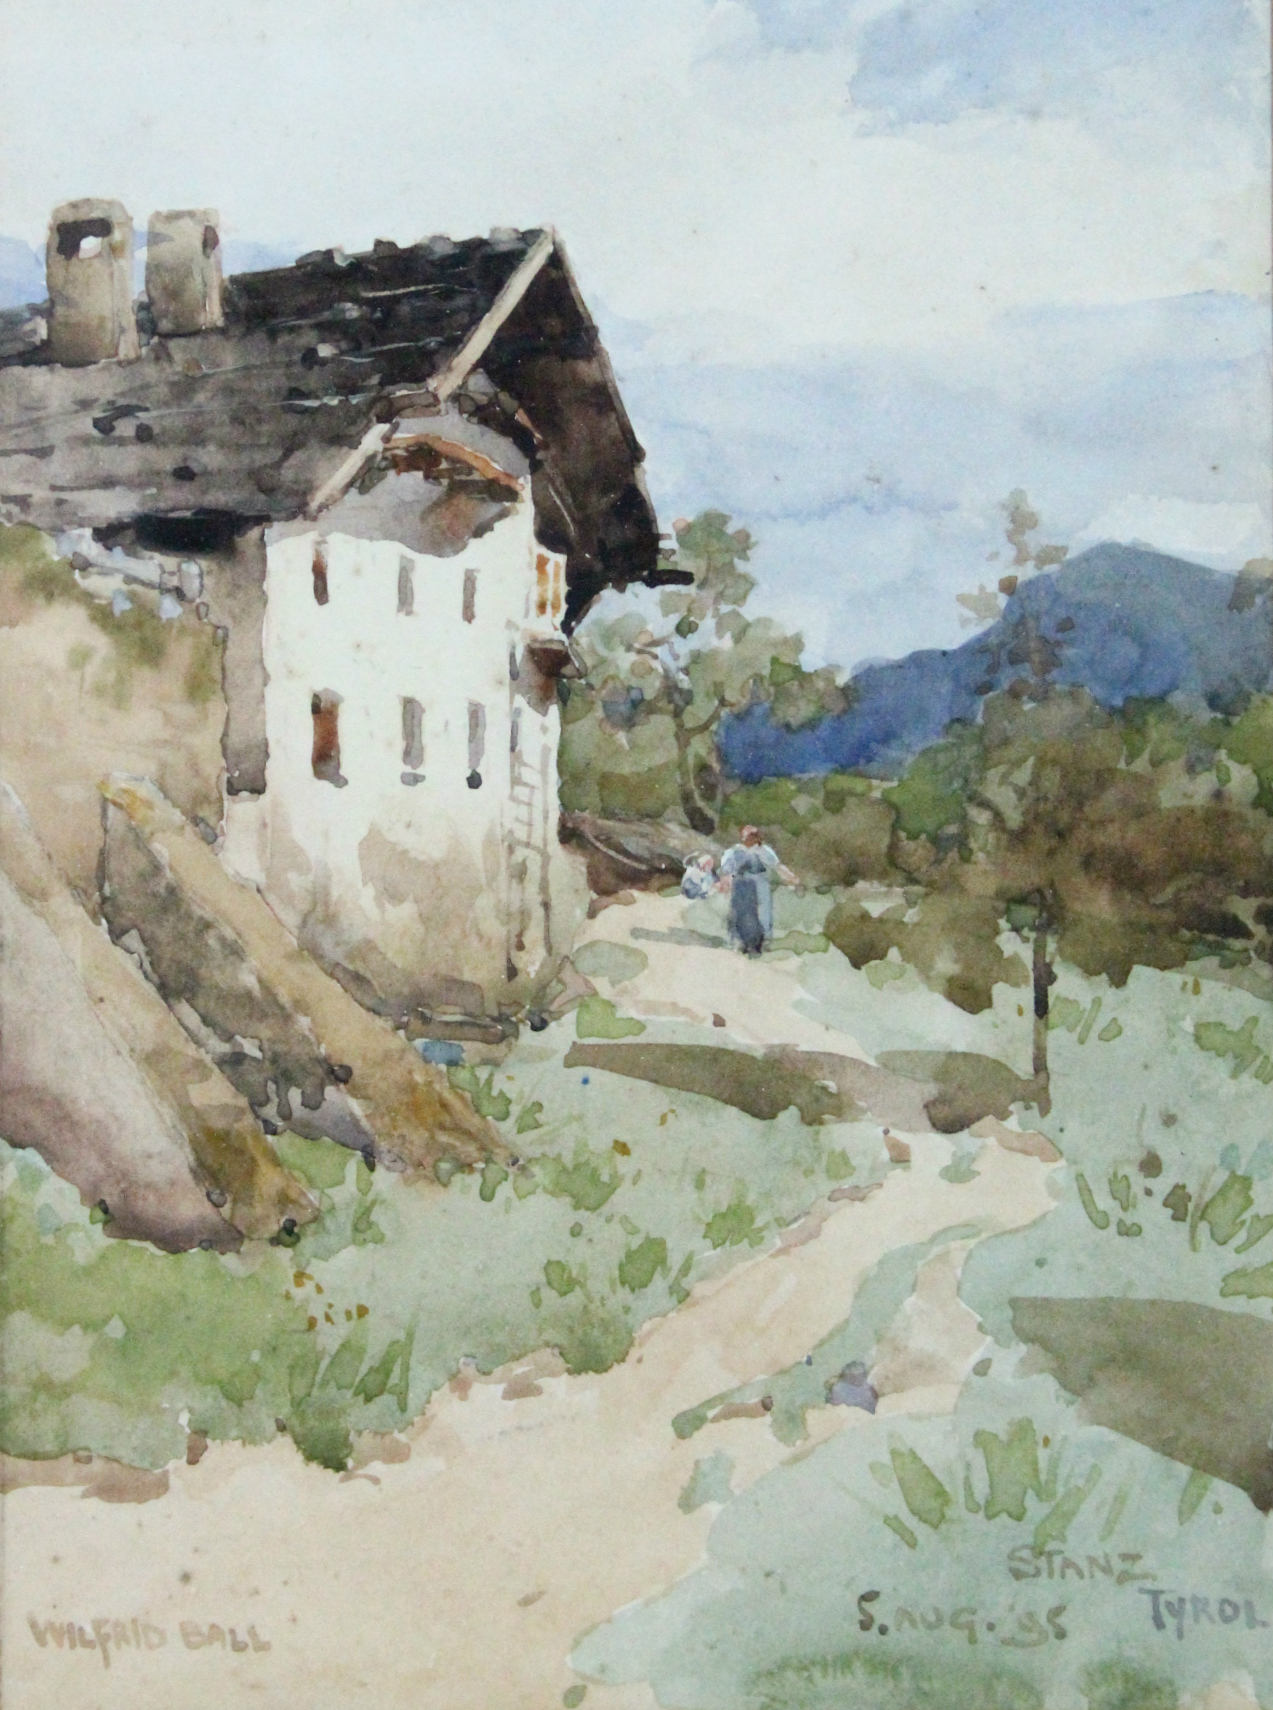 BALL, Wilfred Williams (1853-1917). A chalet at Stanz, Tyrol; signed, inscribed, & dated 5th Aug. (